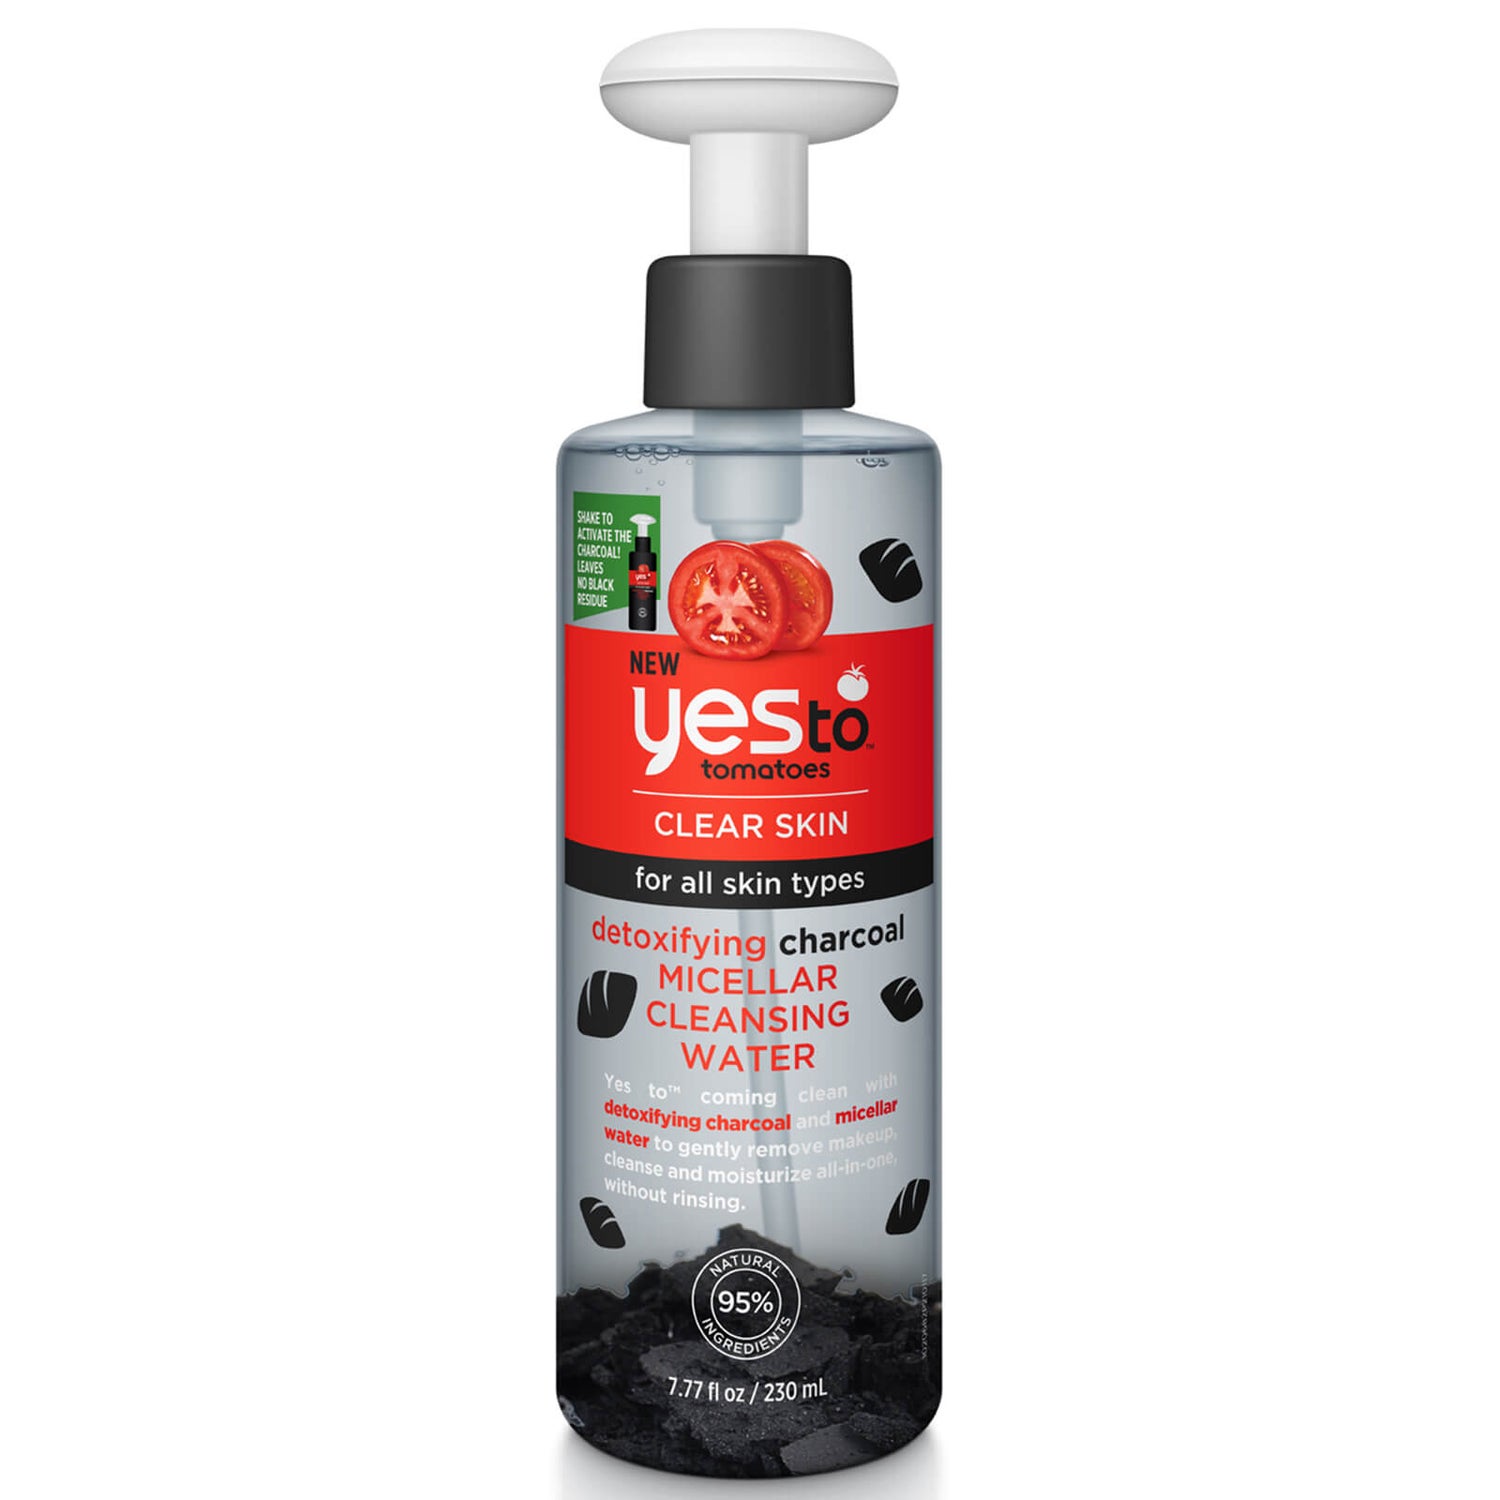 yes to Tomatoes Detoxifying Charcoal Micellar Cleansing Water 230ml